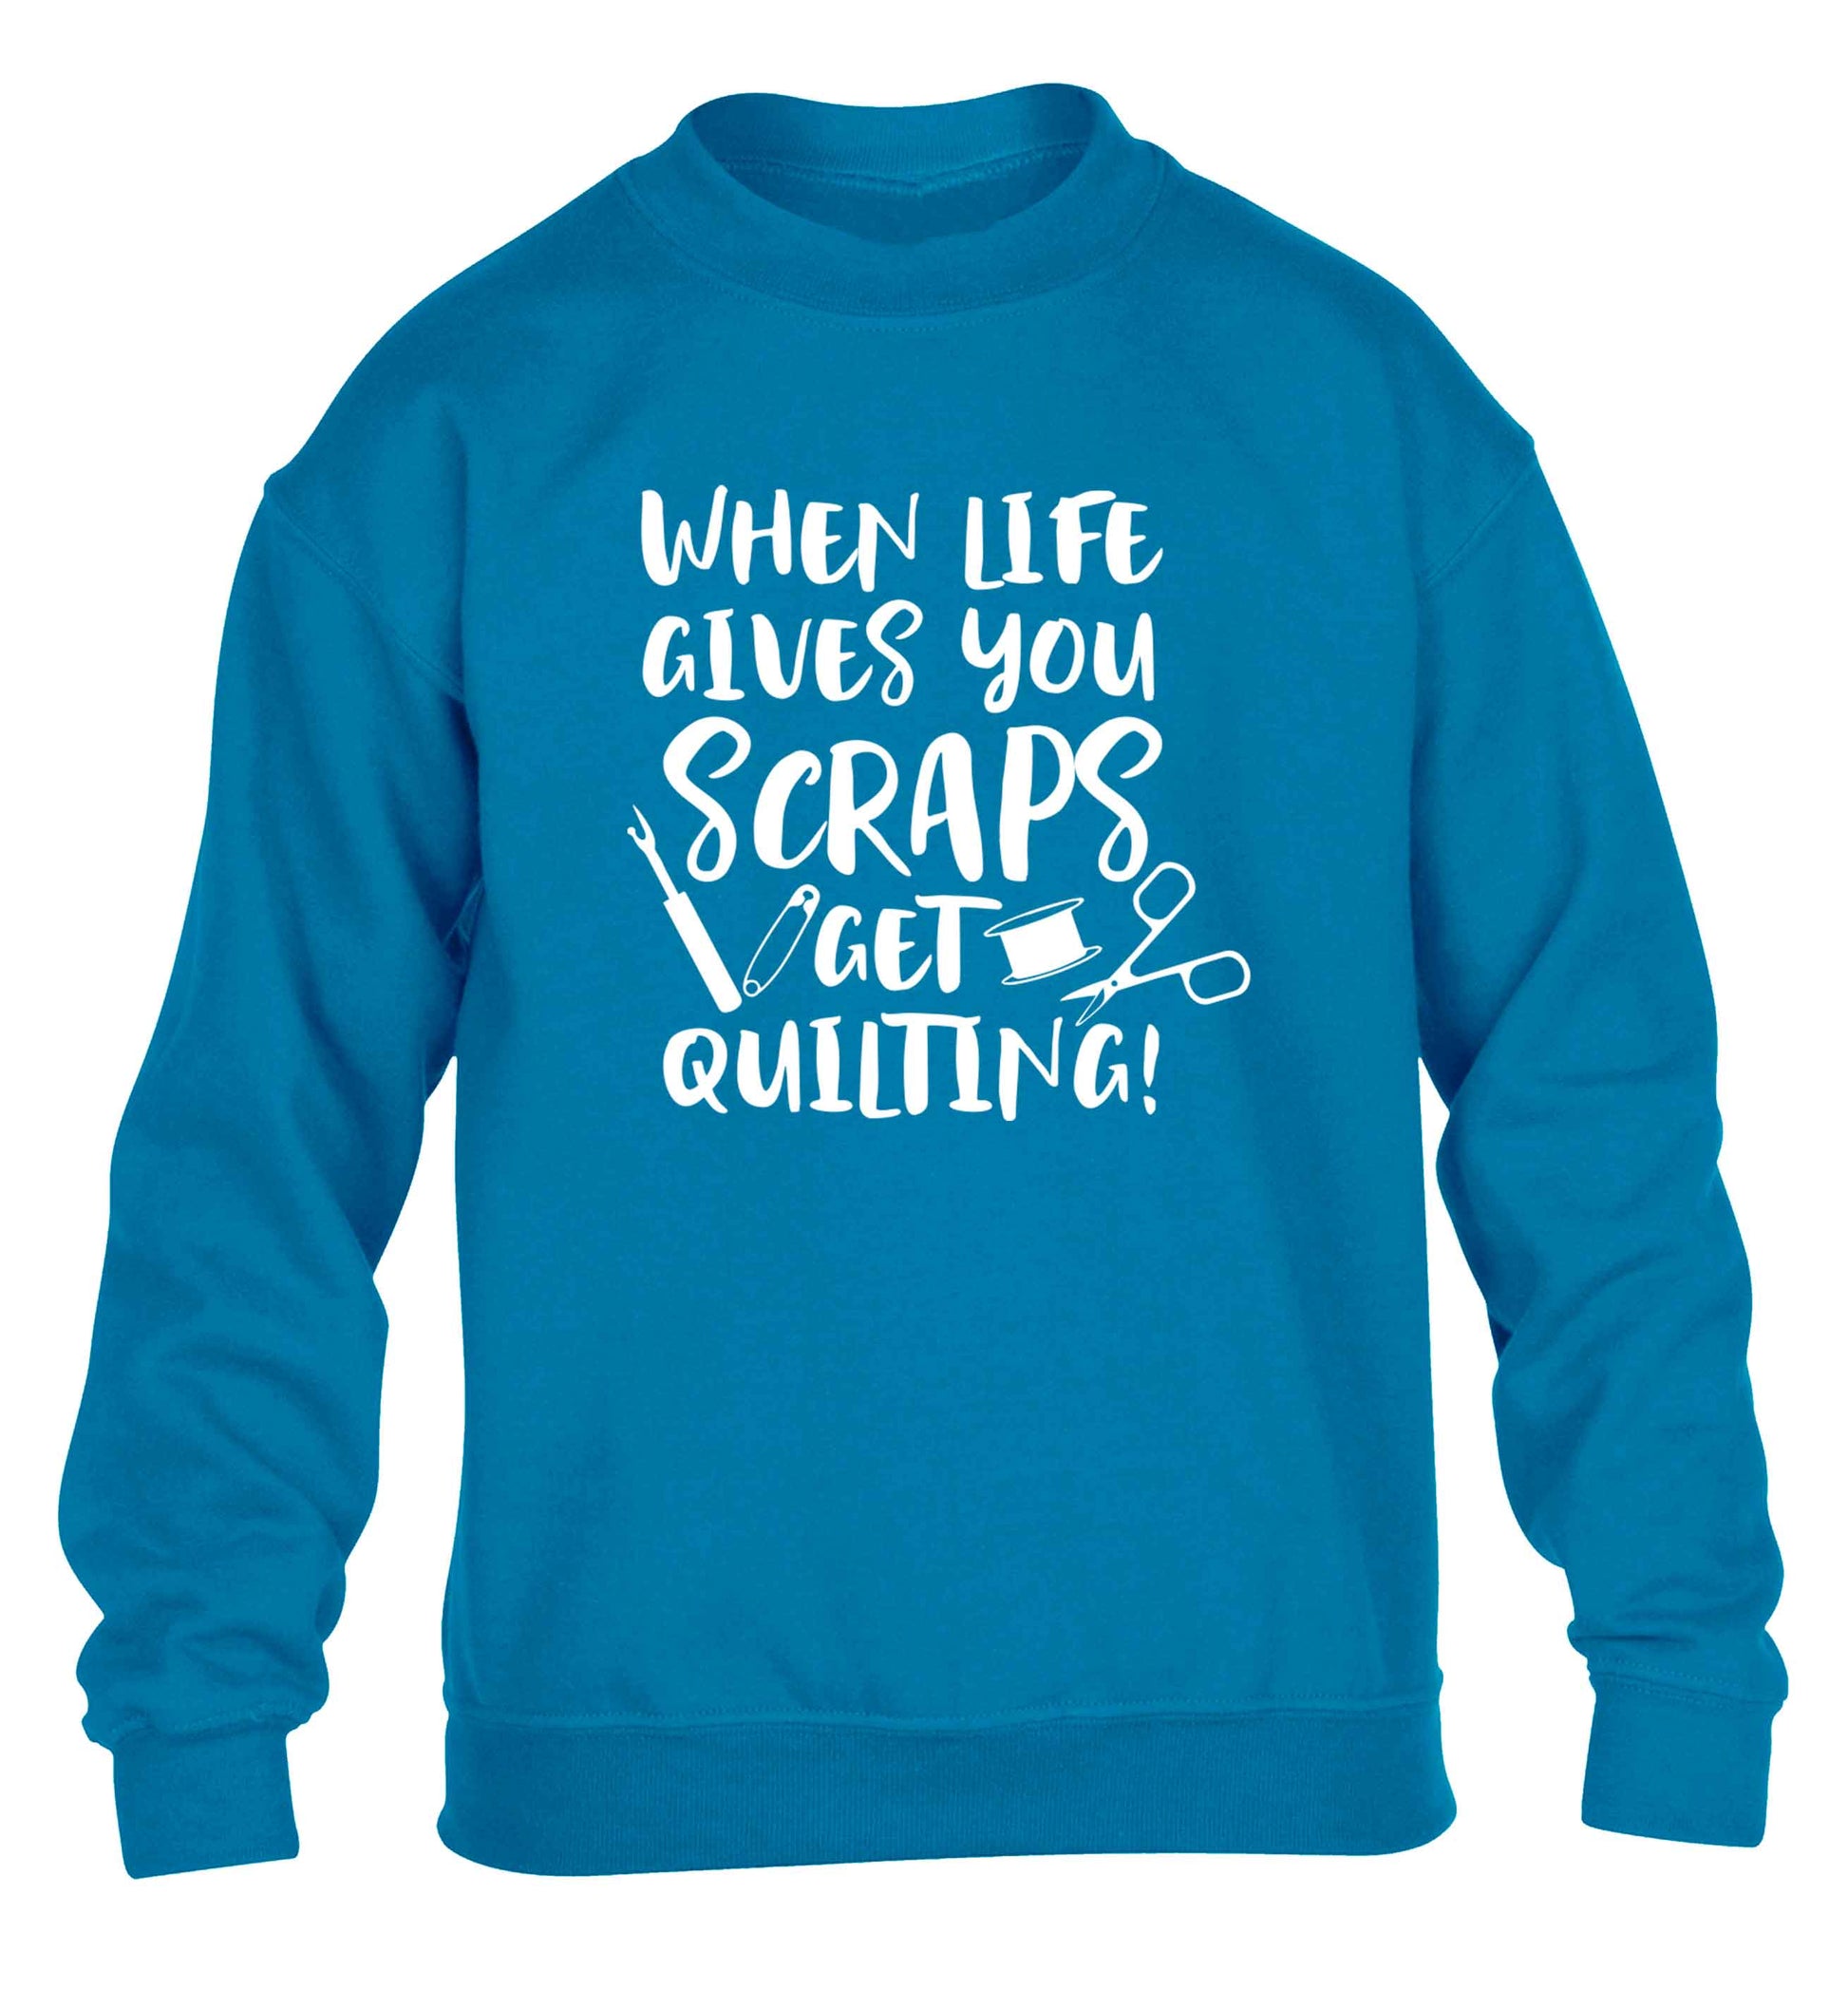 When life gives you scraps get quilting! children's blue sweater 12-13 Years